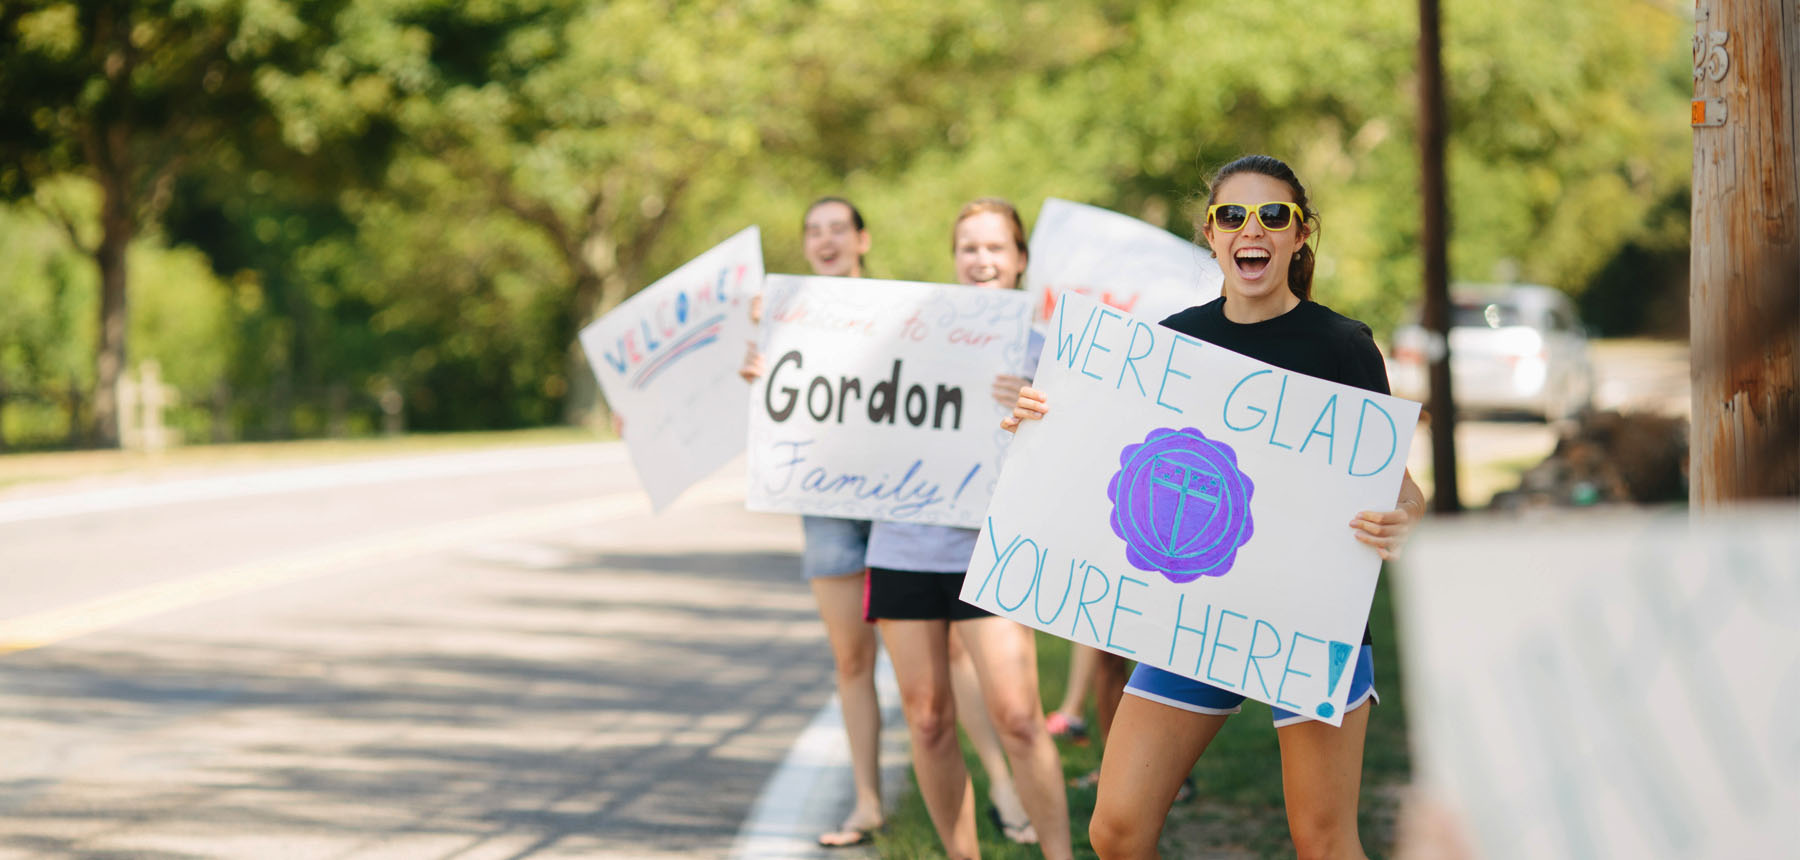 Students with signs welcoming new students